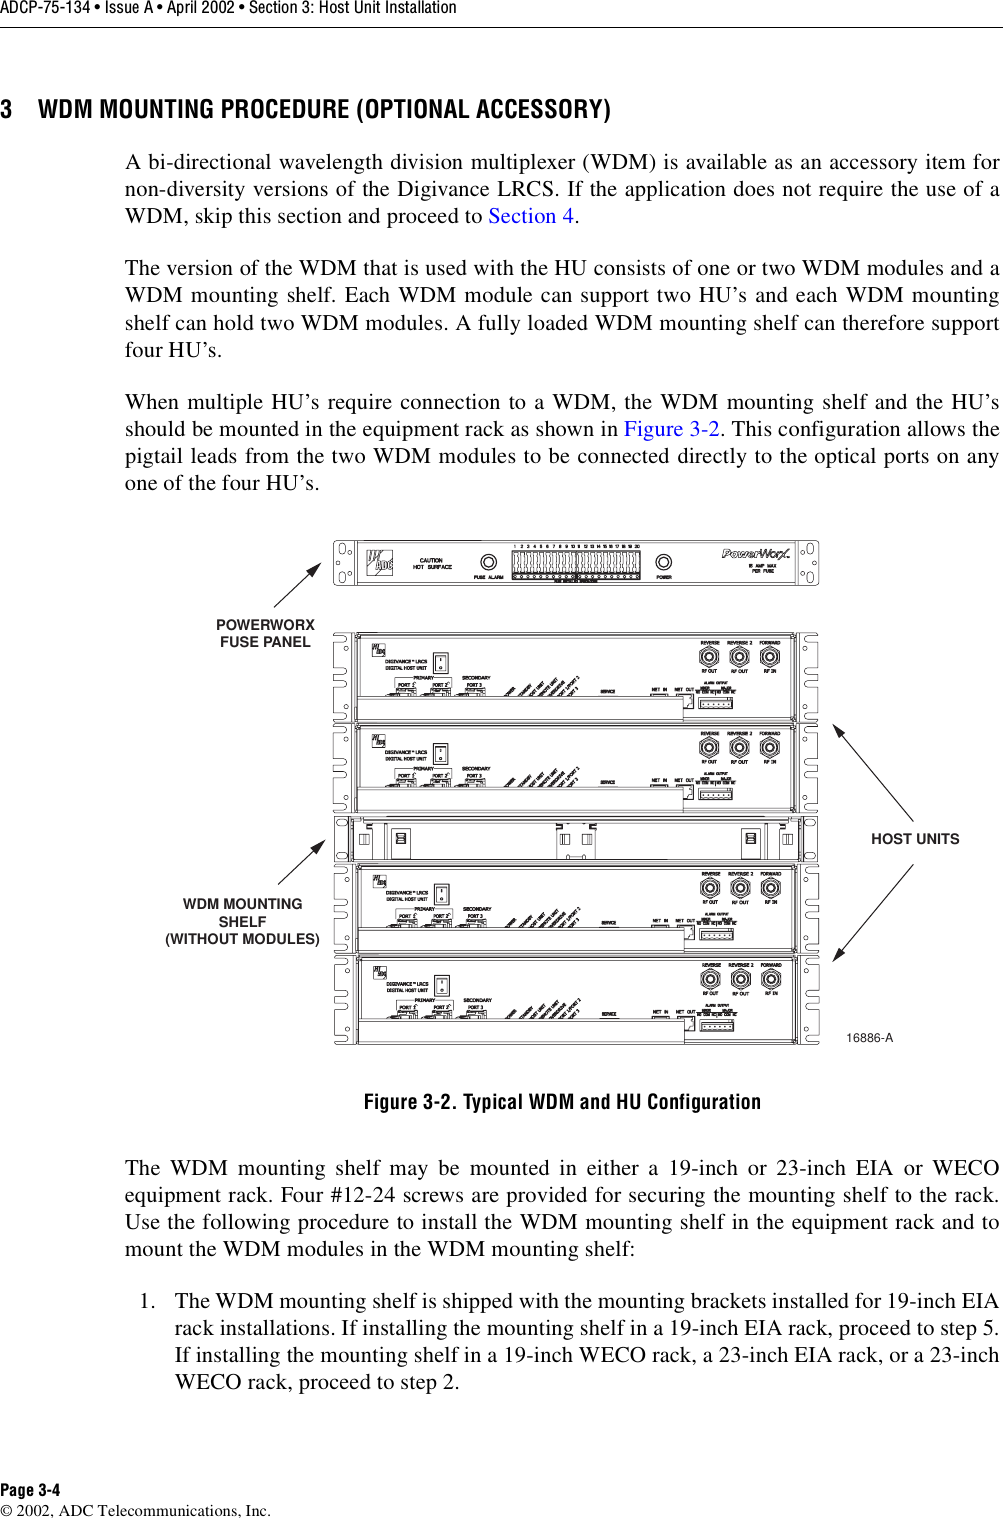 ADCP-75-134 • Issue A • April 2002 • Section 3: Host Unit InstallationPage 3-4©2002, ADC Telecommunications, Inc.3 WDM MOUNTING PROCEDURE (OPTIONAL ACCESSORY)Abi-directional wavelength division multiplexer (WDM) is available as an accessory item fornon-diversity versions of the Digivance LRCS. If the application does not require the use of aWDM, skip this section and proceed to Section 4.The version of the WDM that is used with the HU consists of one or two WDM modules and aWDM mounting shelf. Each WDM module can support two HU’s and each WDM mountingshelf can hold two WDM modules. Afully loaded WDM mounting shelf can therefore supportfour HU’s.When multiple HU’s require connection to aWDM, the WDM mounting shelf and the HU’sshould be mounted in the equipment rack as shown in Figure 3-2.This configuration allows thepigtail leads from the two WDM modules to be connected directly to the optical ports on anyone of the four HU’s.Figure 3-2. Typical WDM and HU ConfigurationThe WDM mounting shelf may be mounted in either a19-inch or 23-inch EIA or WECOequipment rack. Four #12-24 screws are provided for securing the mounting shelf to the rack.Use the following procedure to install the WDM mounting shelf in the equipment rack and tomount the WDM modules in the WDM mounting shelf:1. The WDM mounting shelf is shipped with the mounting brackets installed for 19-inch EIArack installations. If installing the mounting shelf in a19-inch EIA rack, proceed to step 5.If installing the mounting shelf in a19-inch WECO rack, a23-inch EIA rack, or a23-inchWECO rack, proceed to step 2.WDM MOUNTINGSHELF(WITHOUT MODULES)16886-APOWERWORXFUSE PANELHOST UNITS